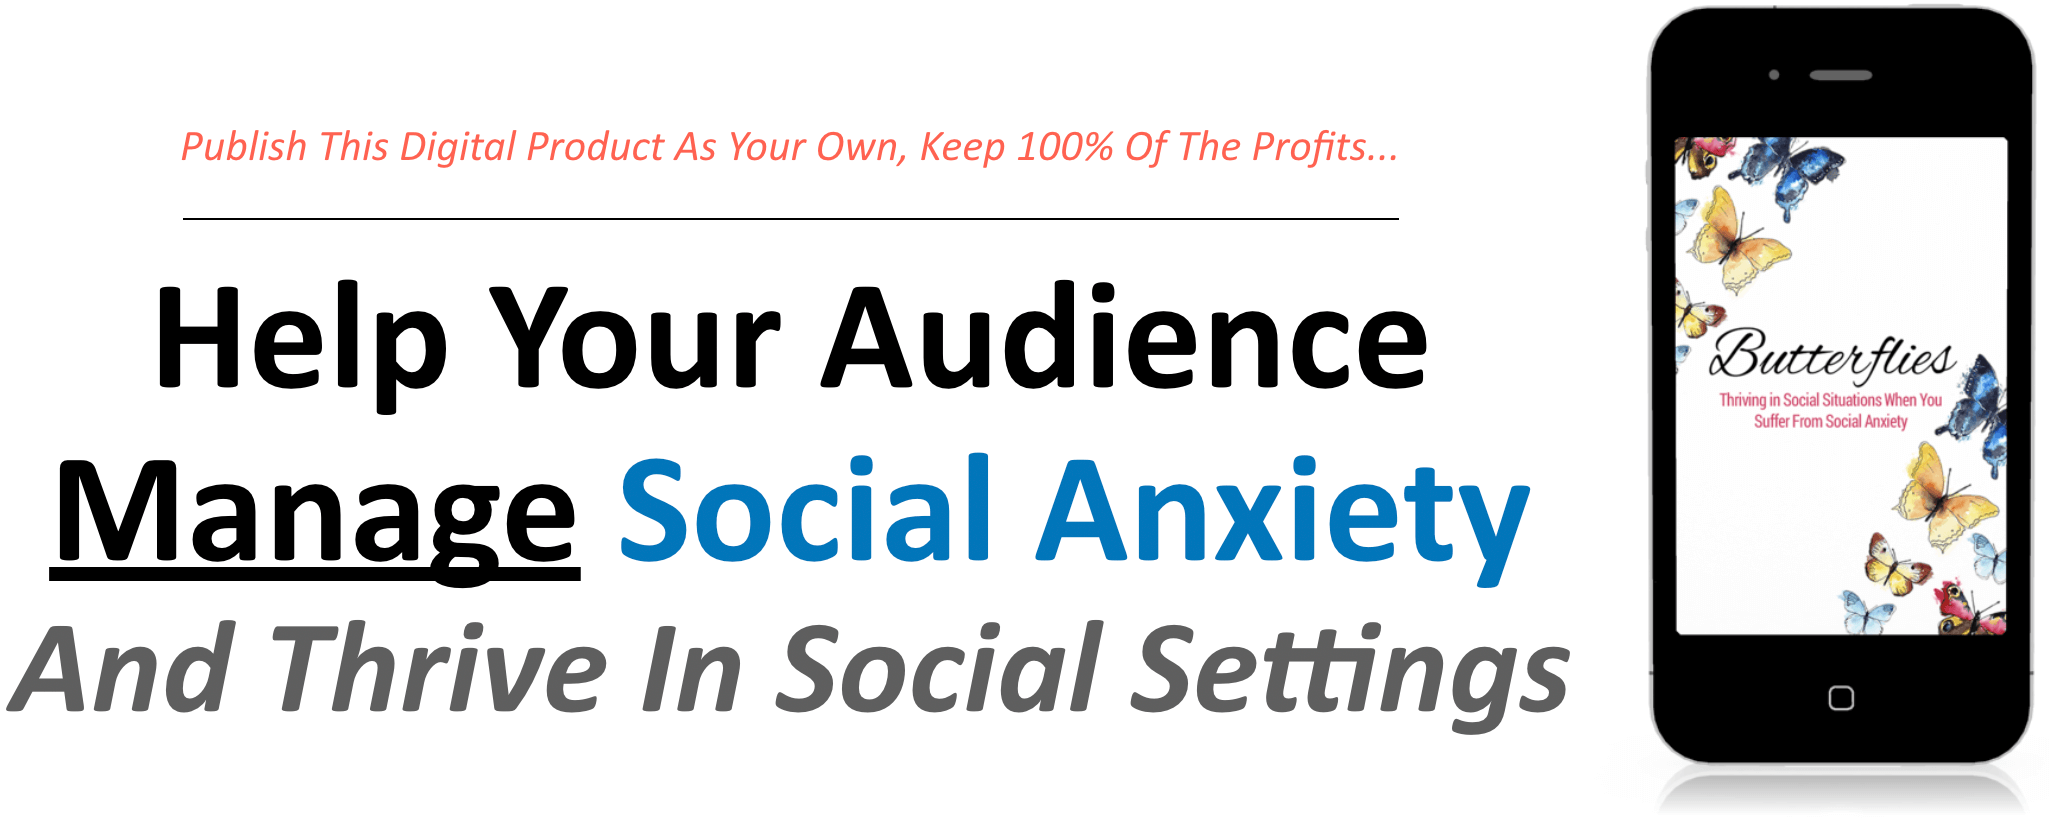 Beat Social Anxiety Download